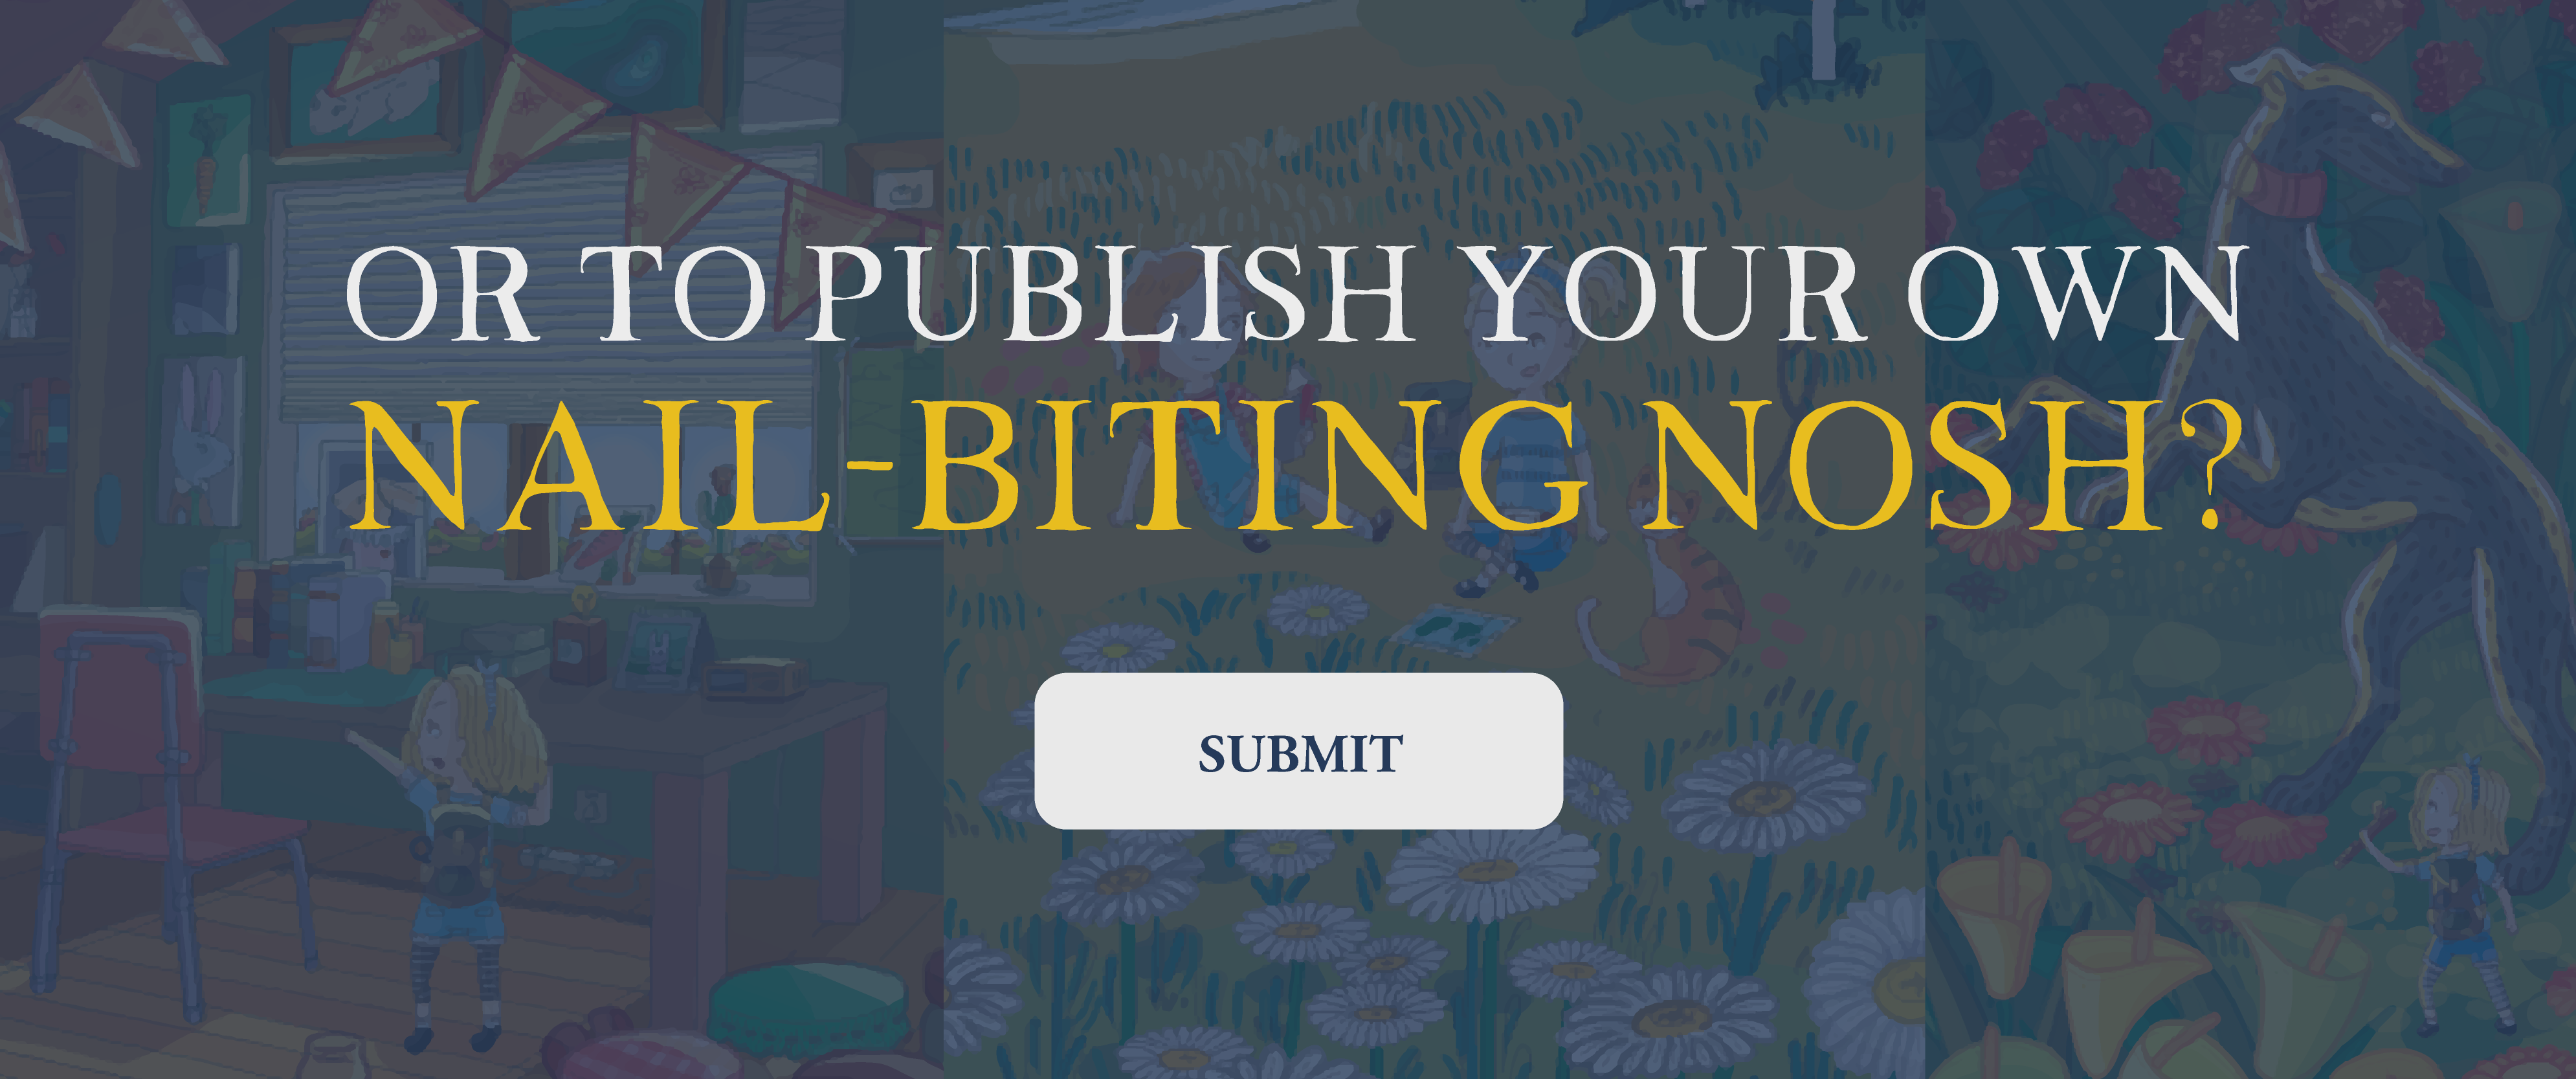 Self publishing options for indie authors